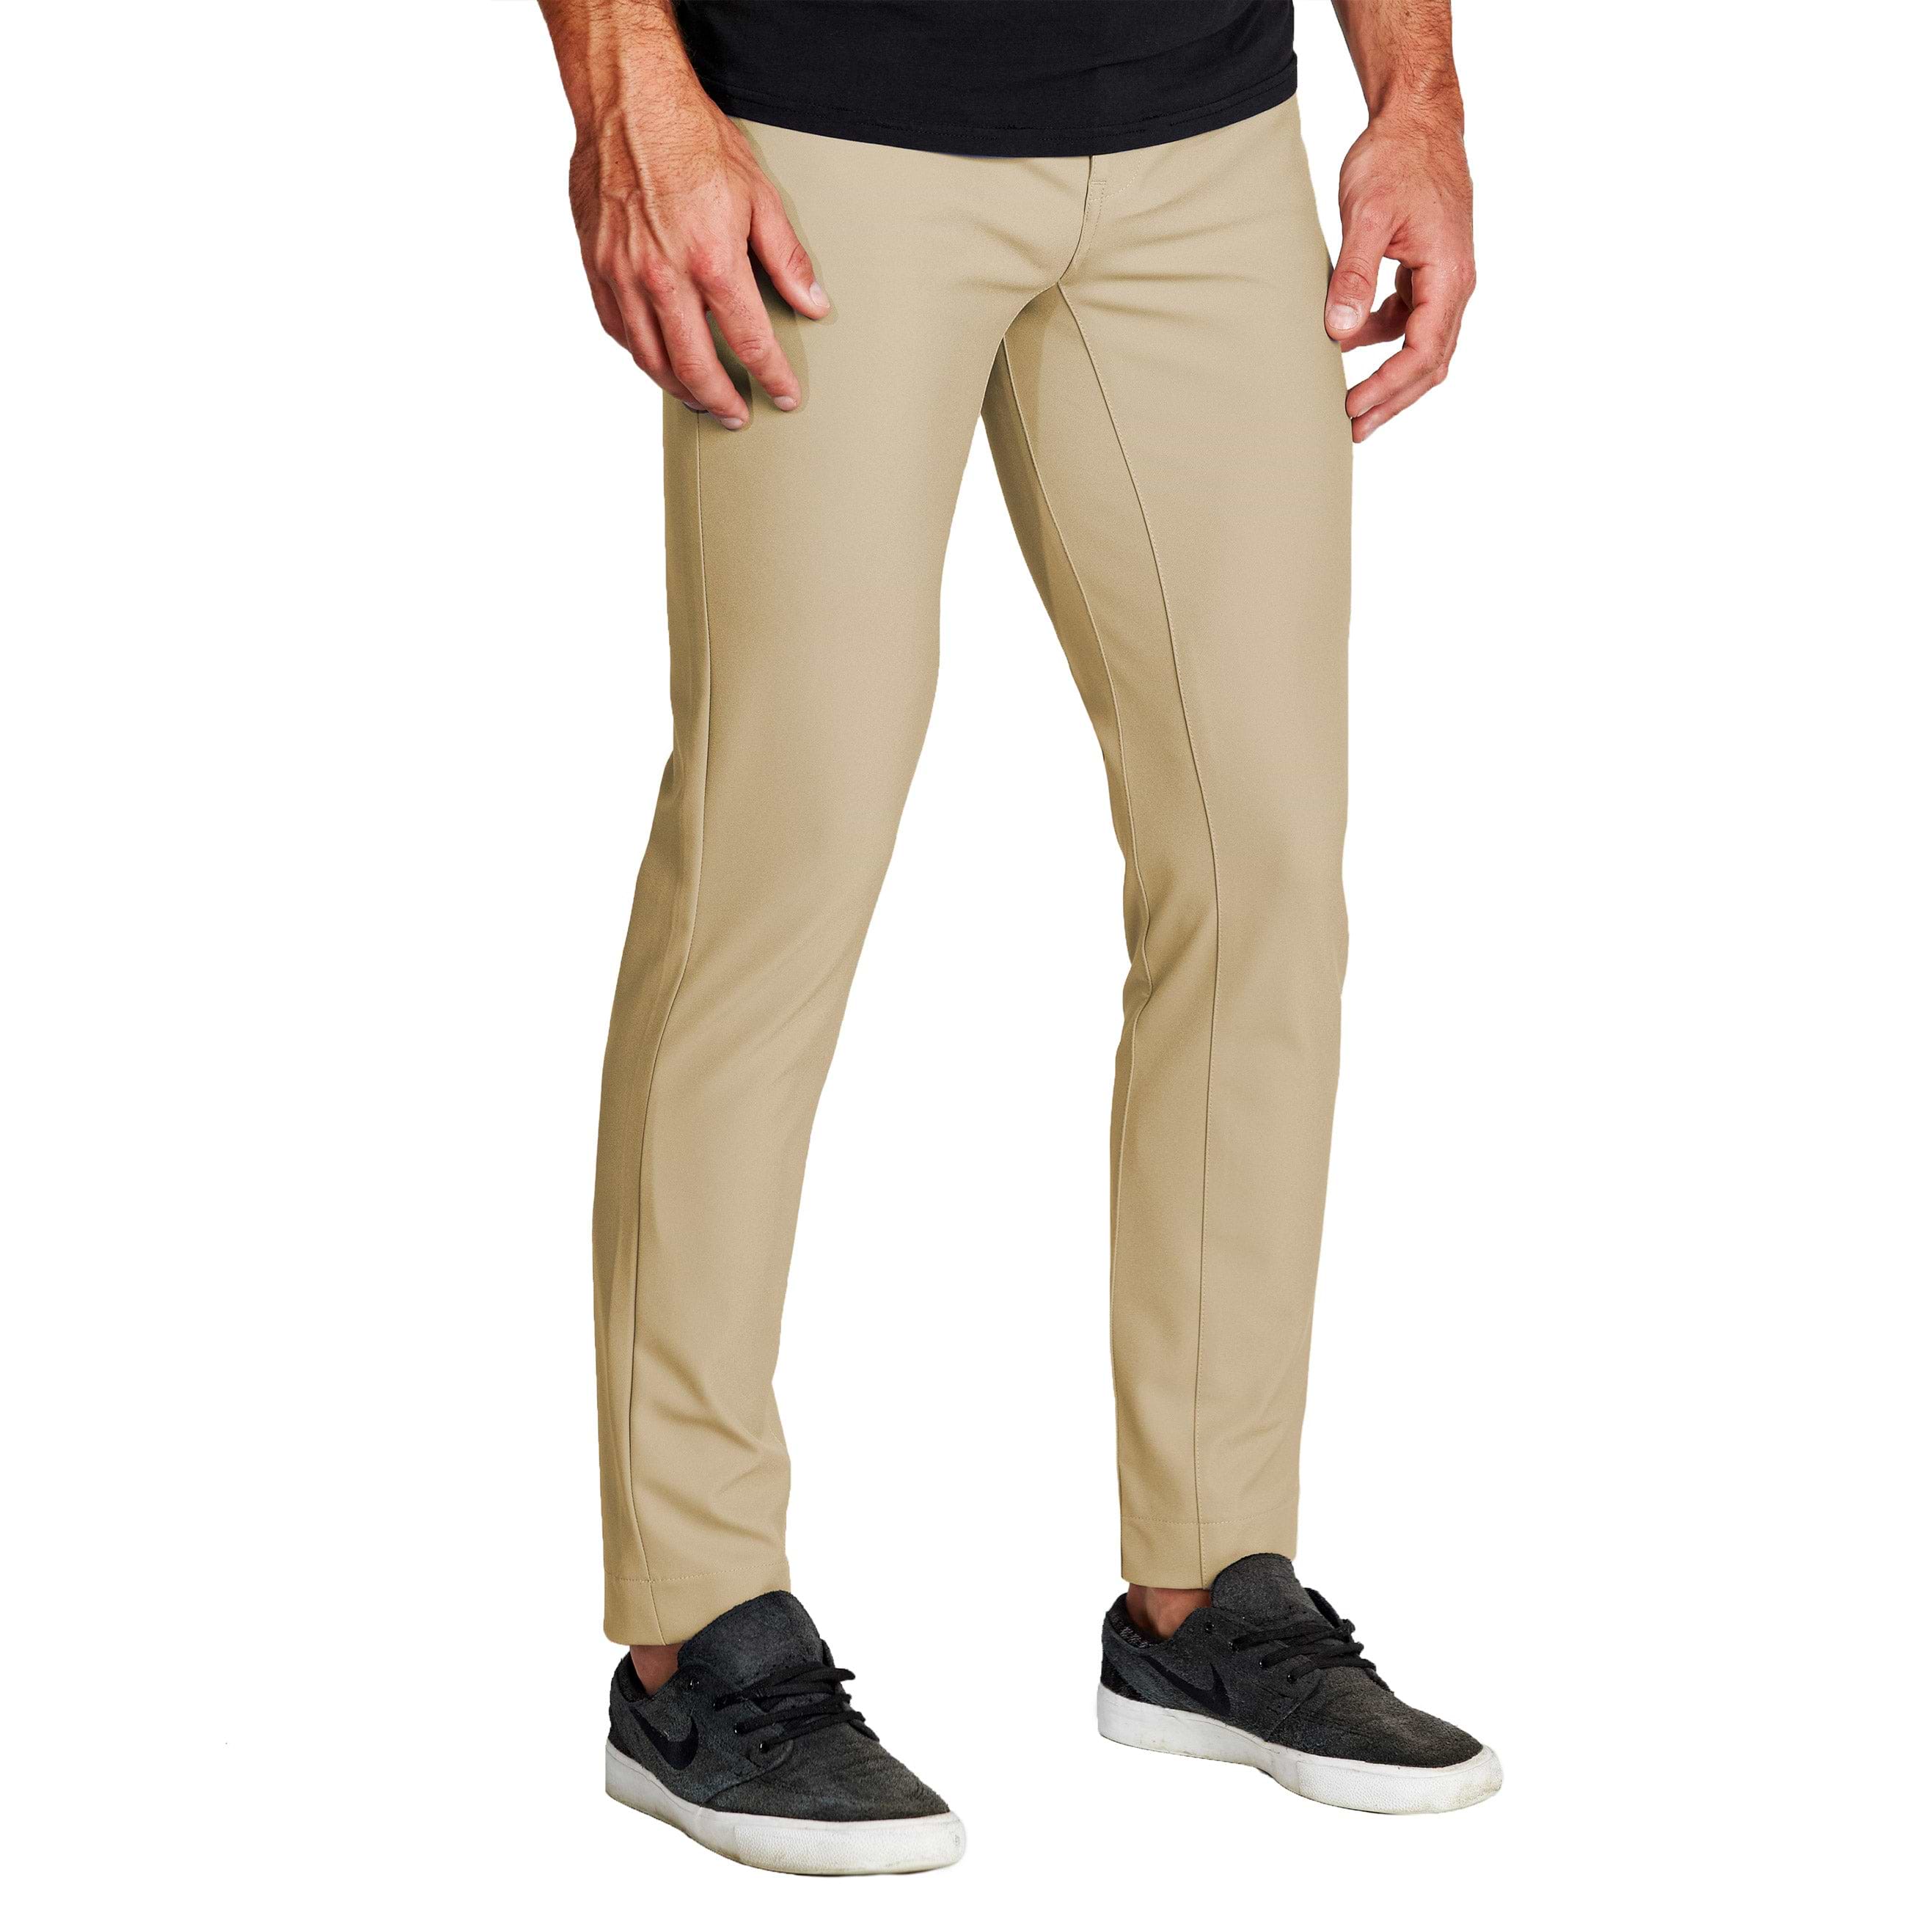 The 9 best athletic fit pants for guys with big thighs - The Manual